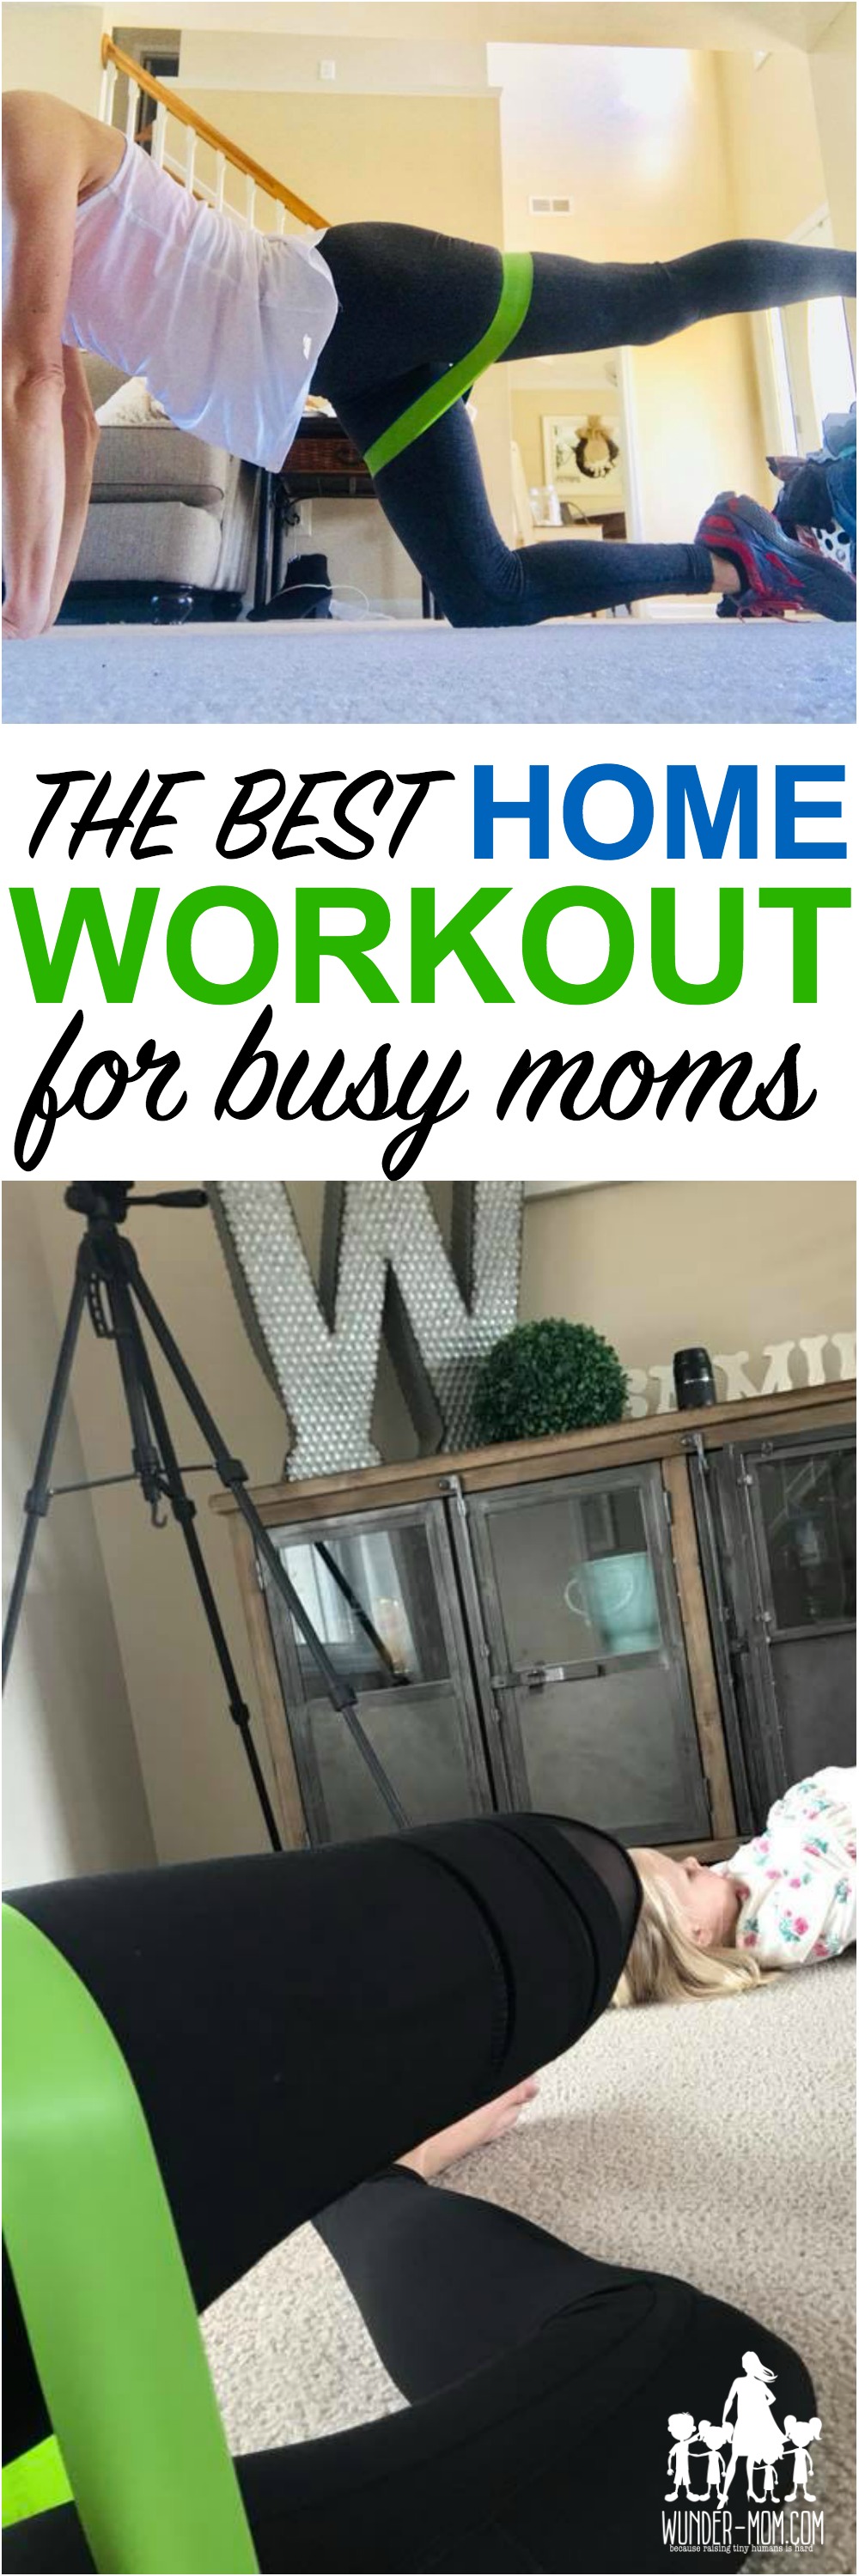 best home workout